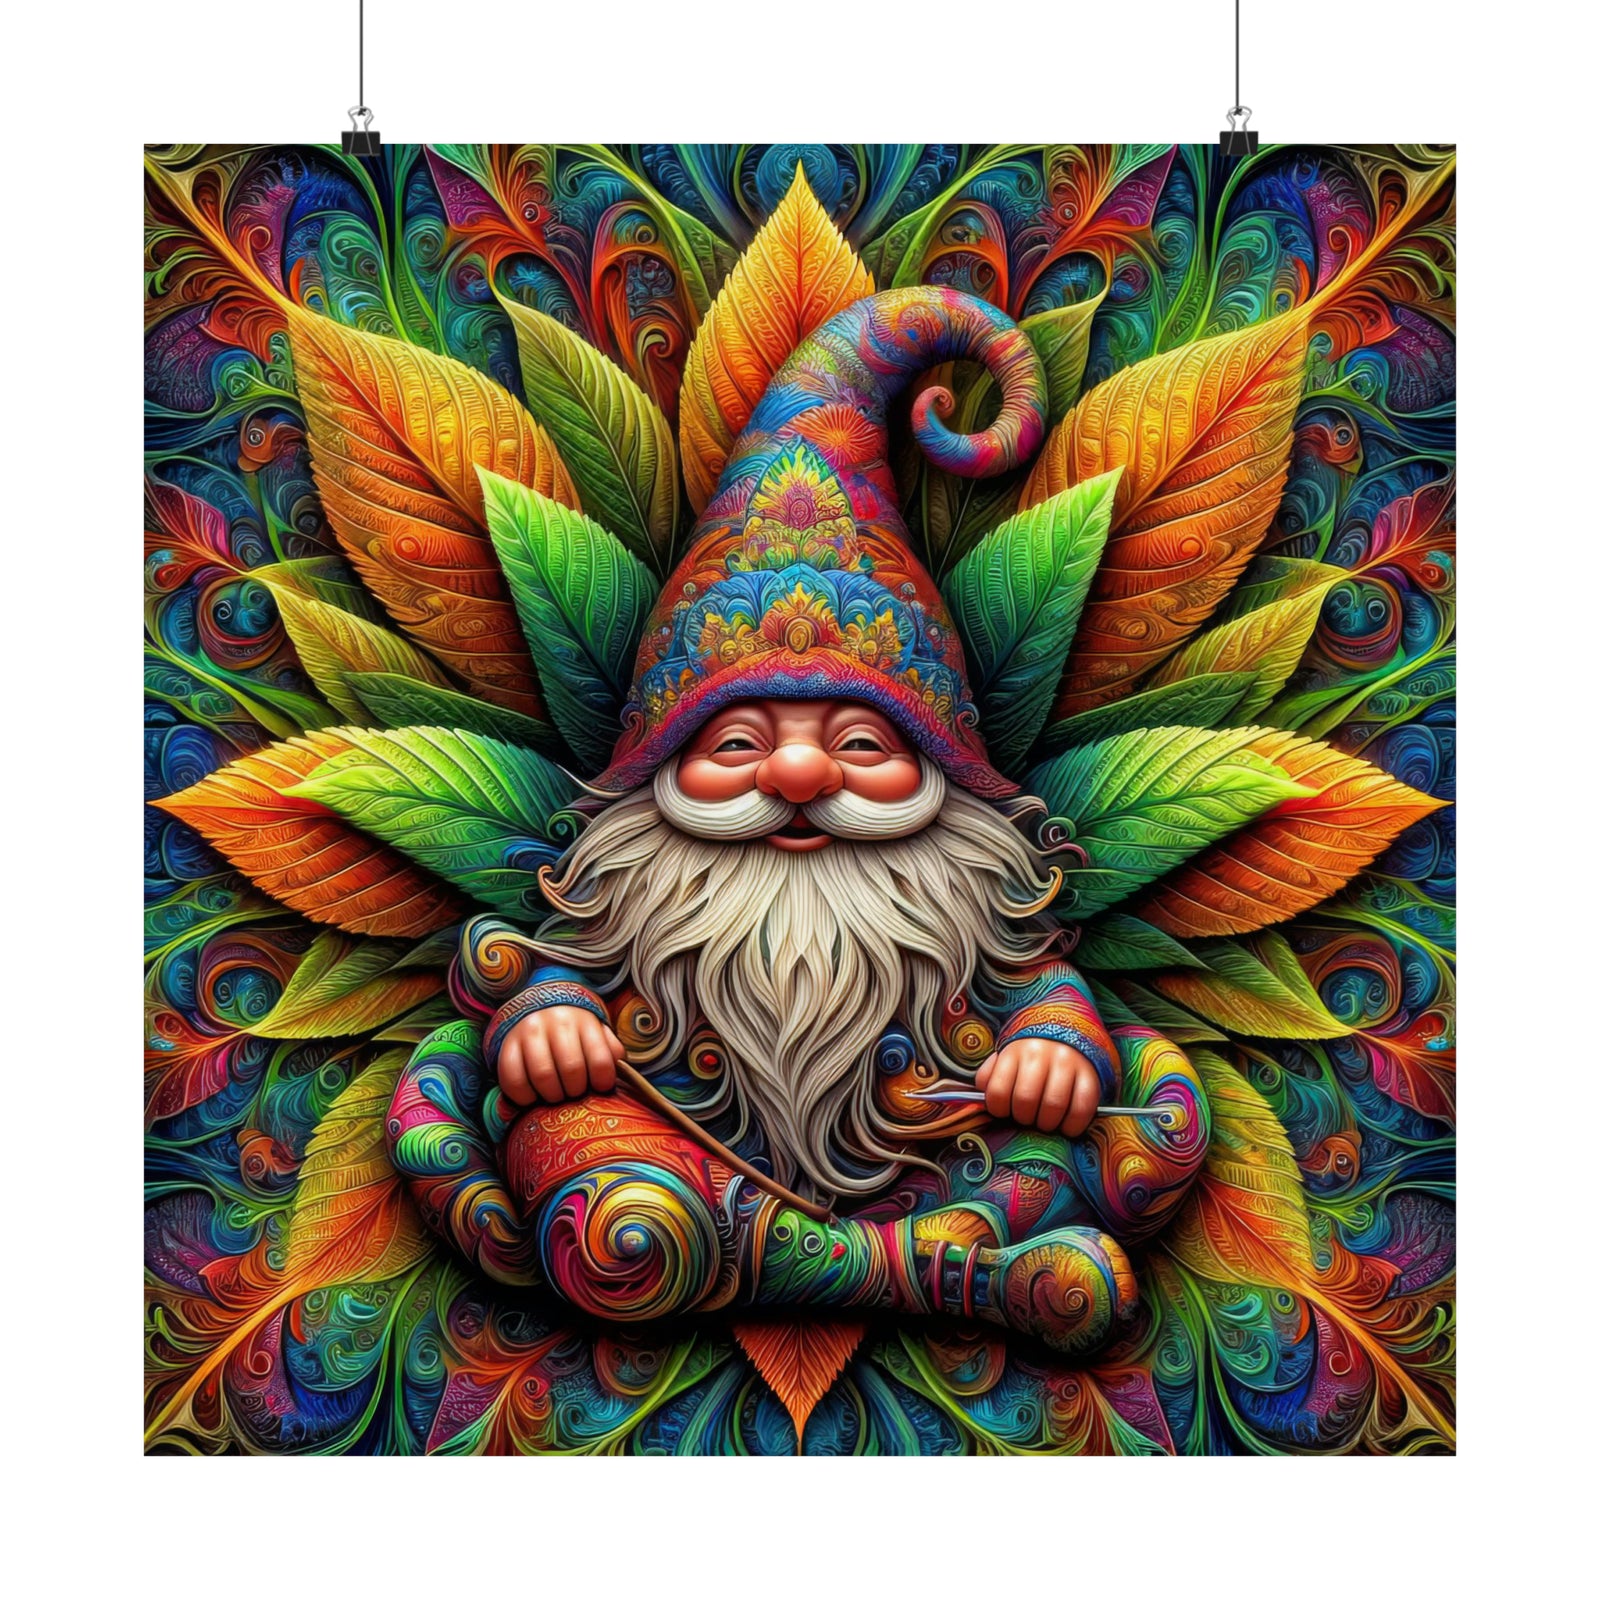 The Gnome's Whimsical Watch Poster